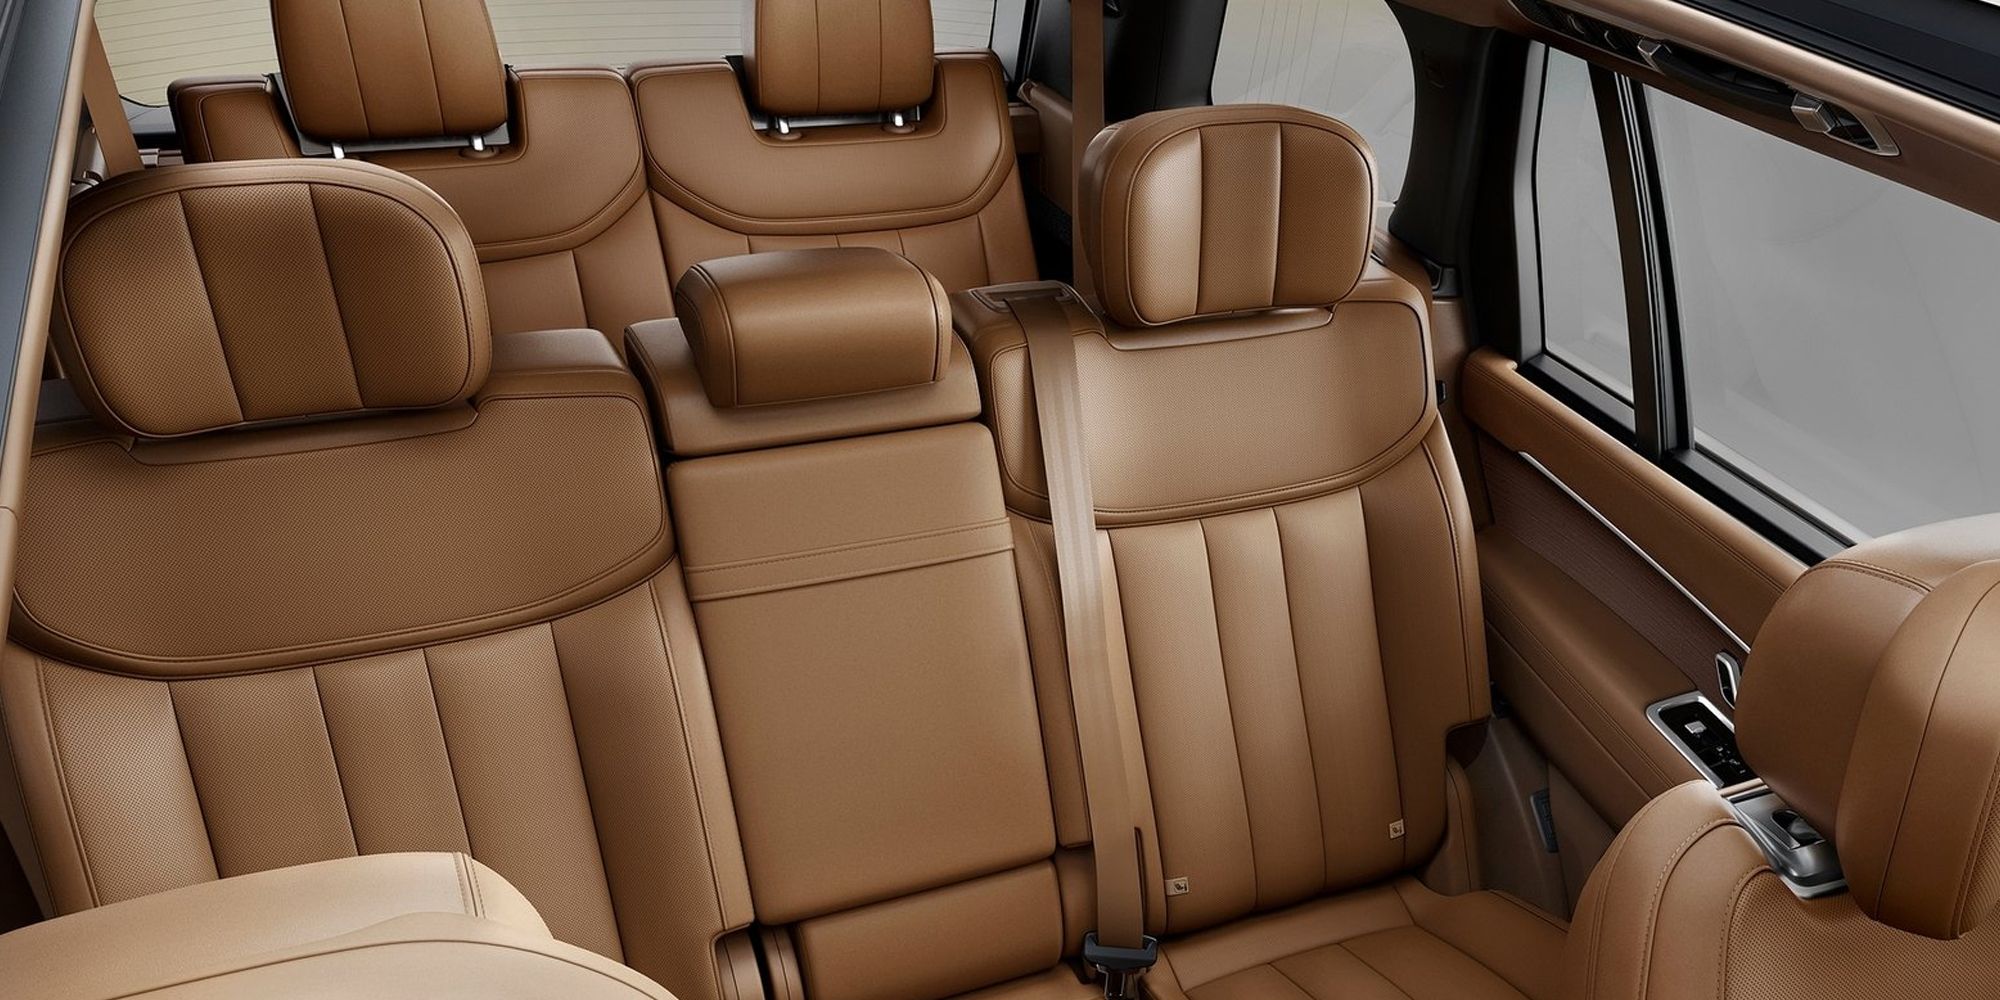 The rear seats in the new Range Rover, three-row seating